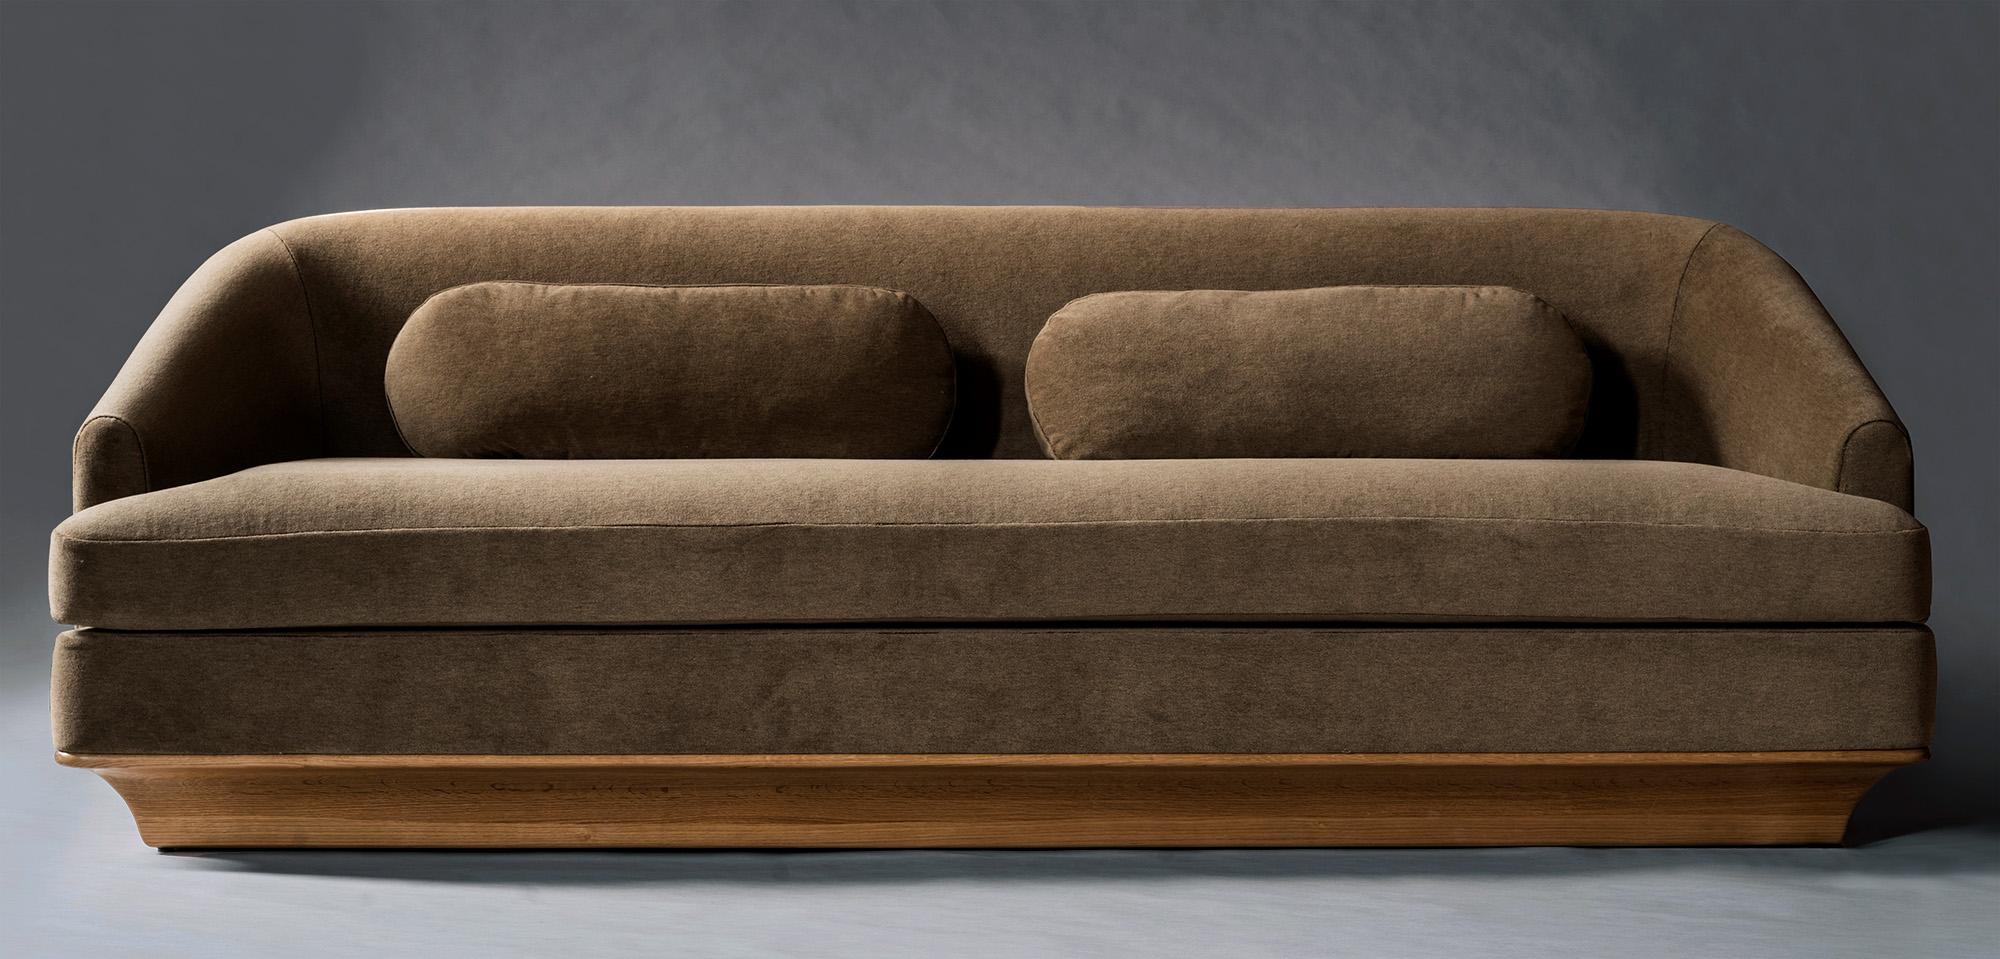 The Nico Sofa combines handsome proportions with timeless materials and an emphasis on comfort. Straight lines are tempered by curved edges and sloping arms, resulting in a thoughtful balance of hard and soft elements. Subtle decorative accents,